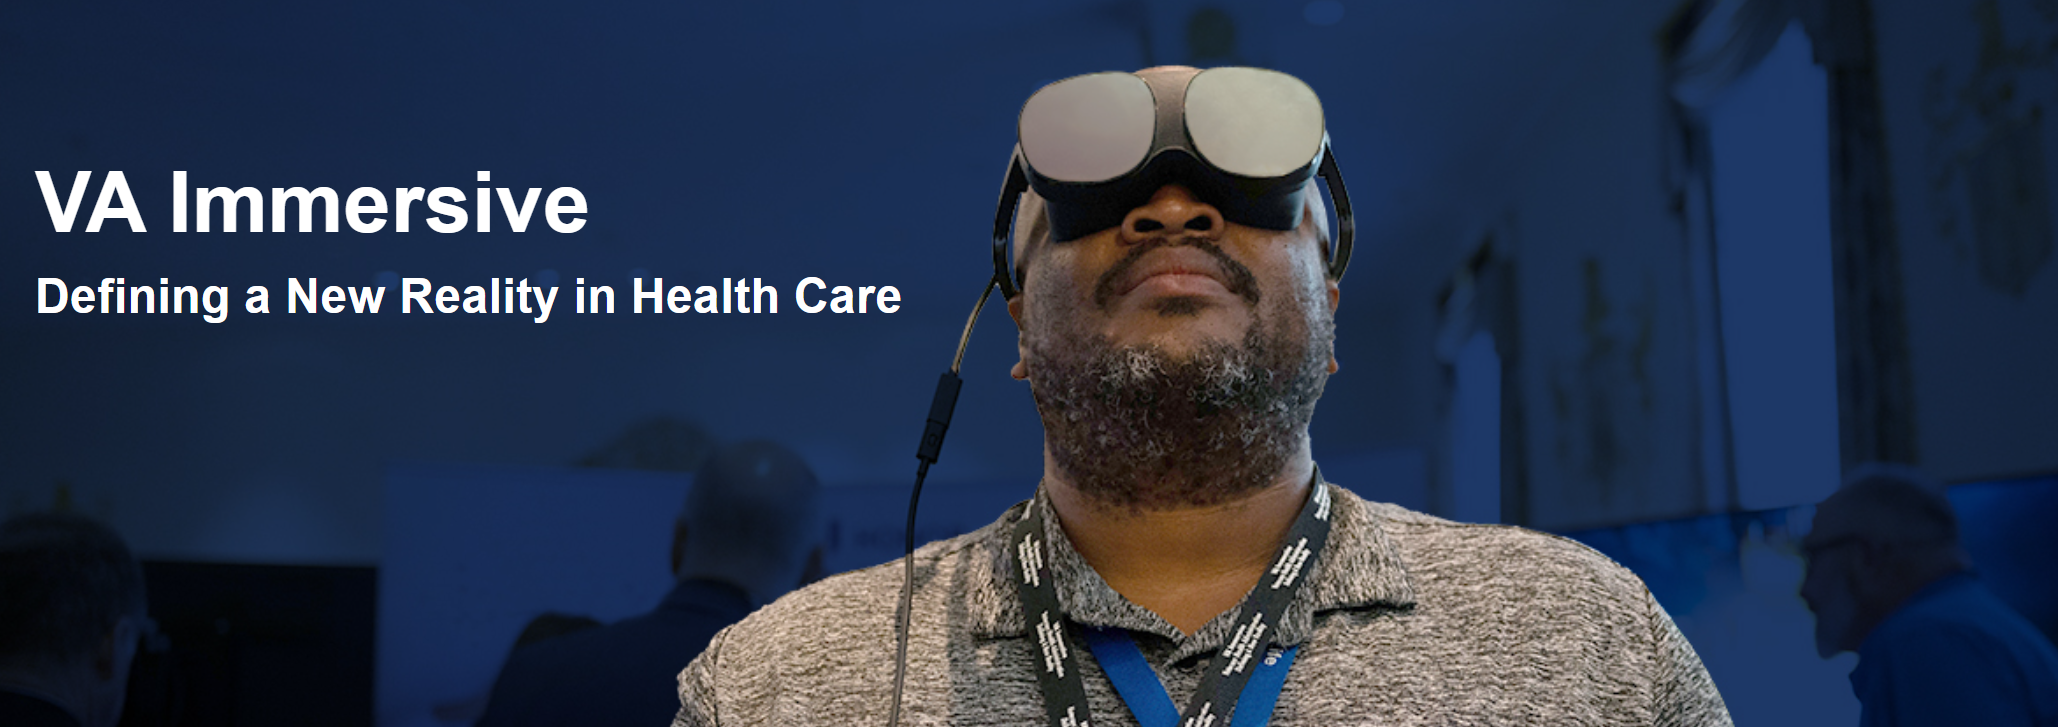 VA Expands Access to Virtual Reality Pain Therapy for Veterans with AppliedVR Partnership